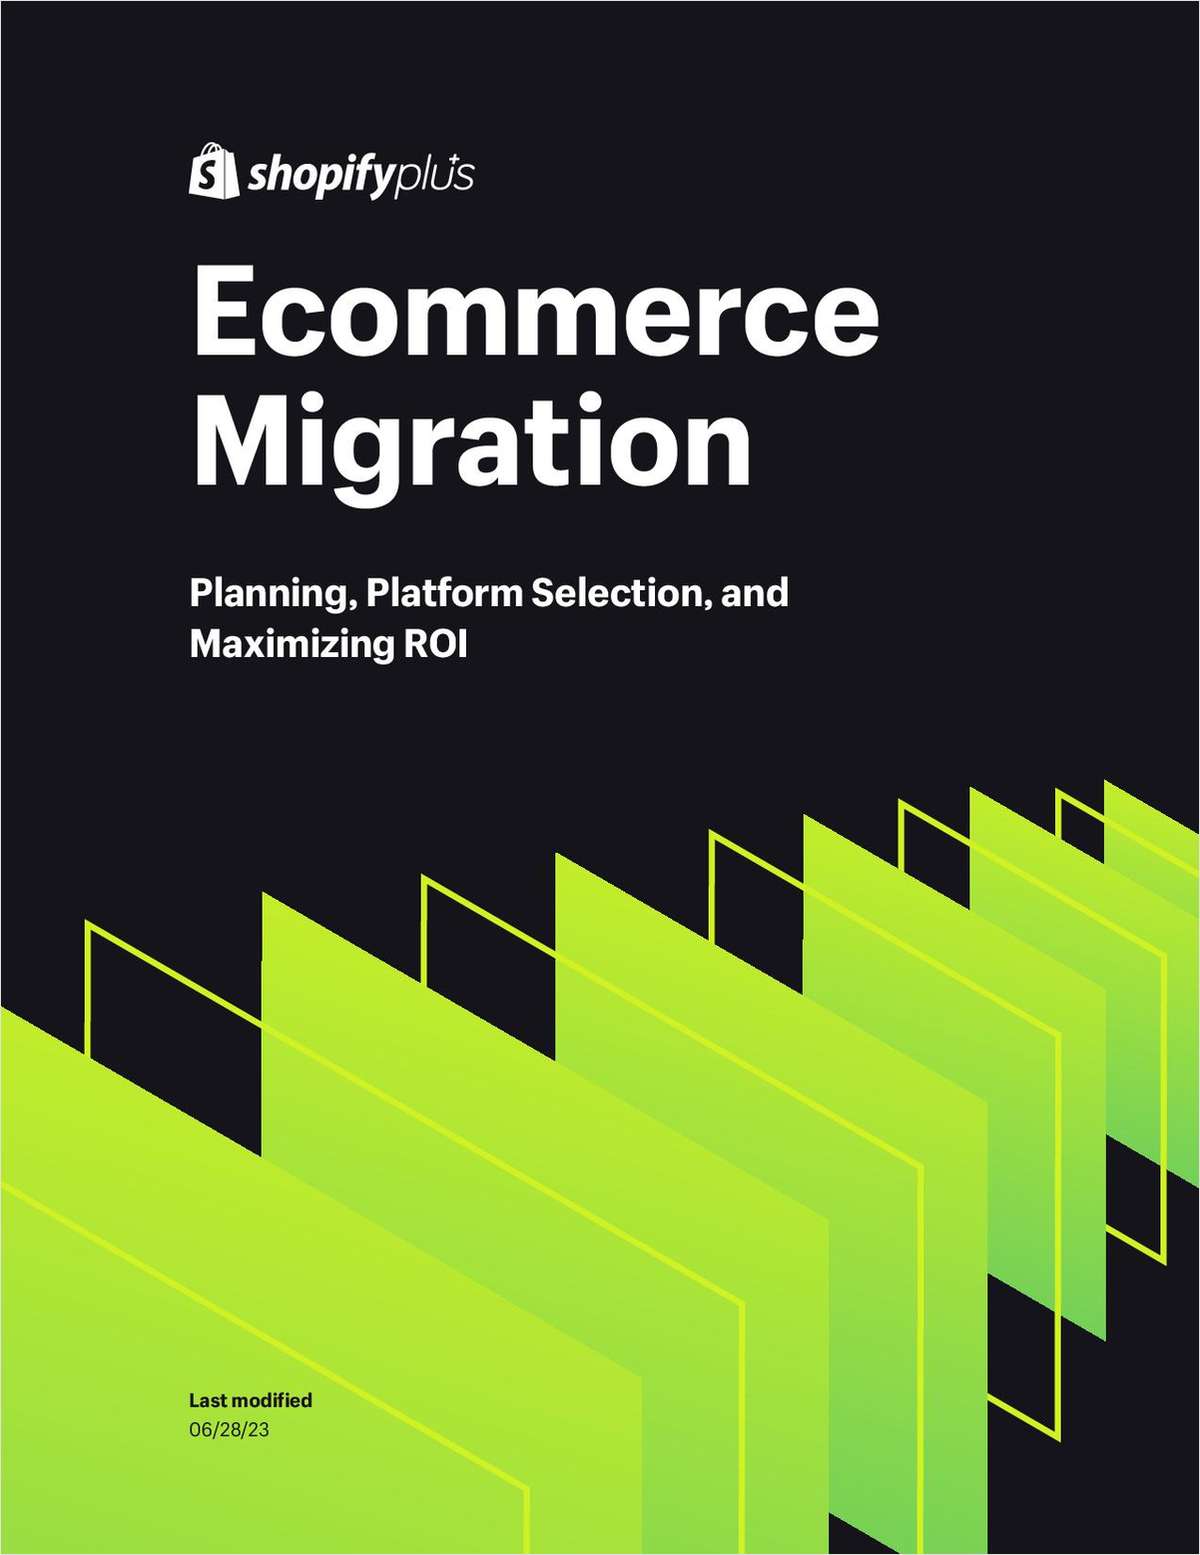 Ecommerce Migration: Avoid Pitfalls and Boost Performance